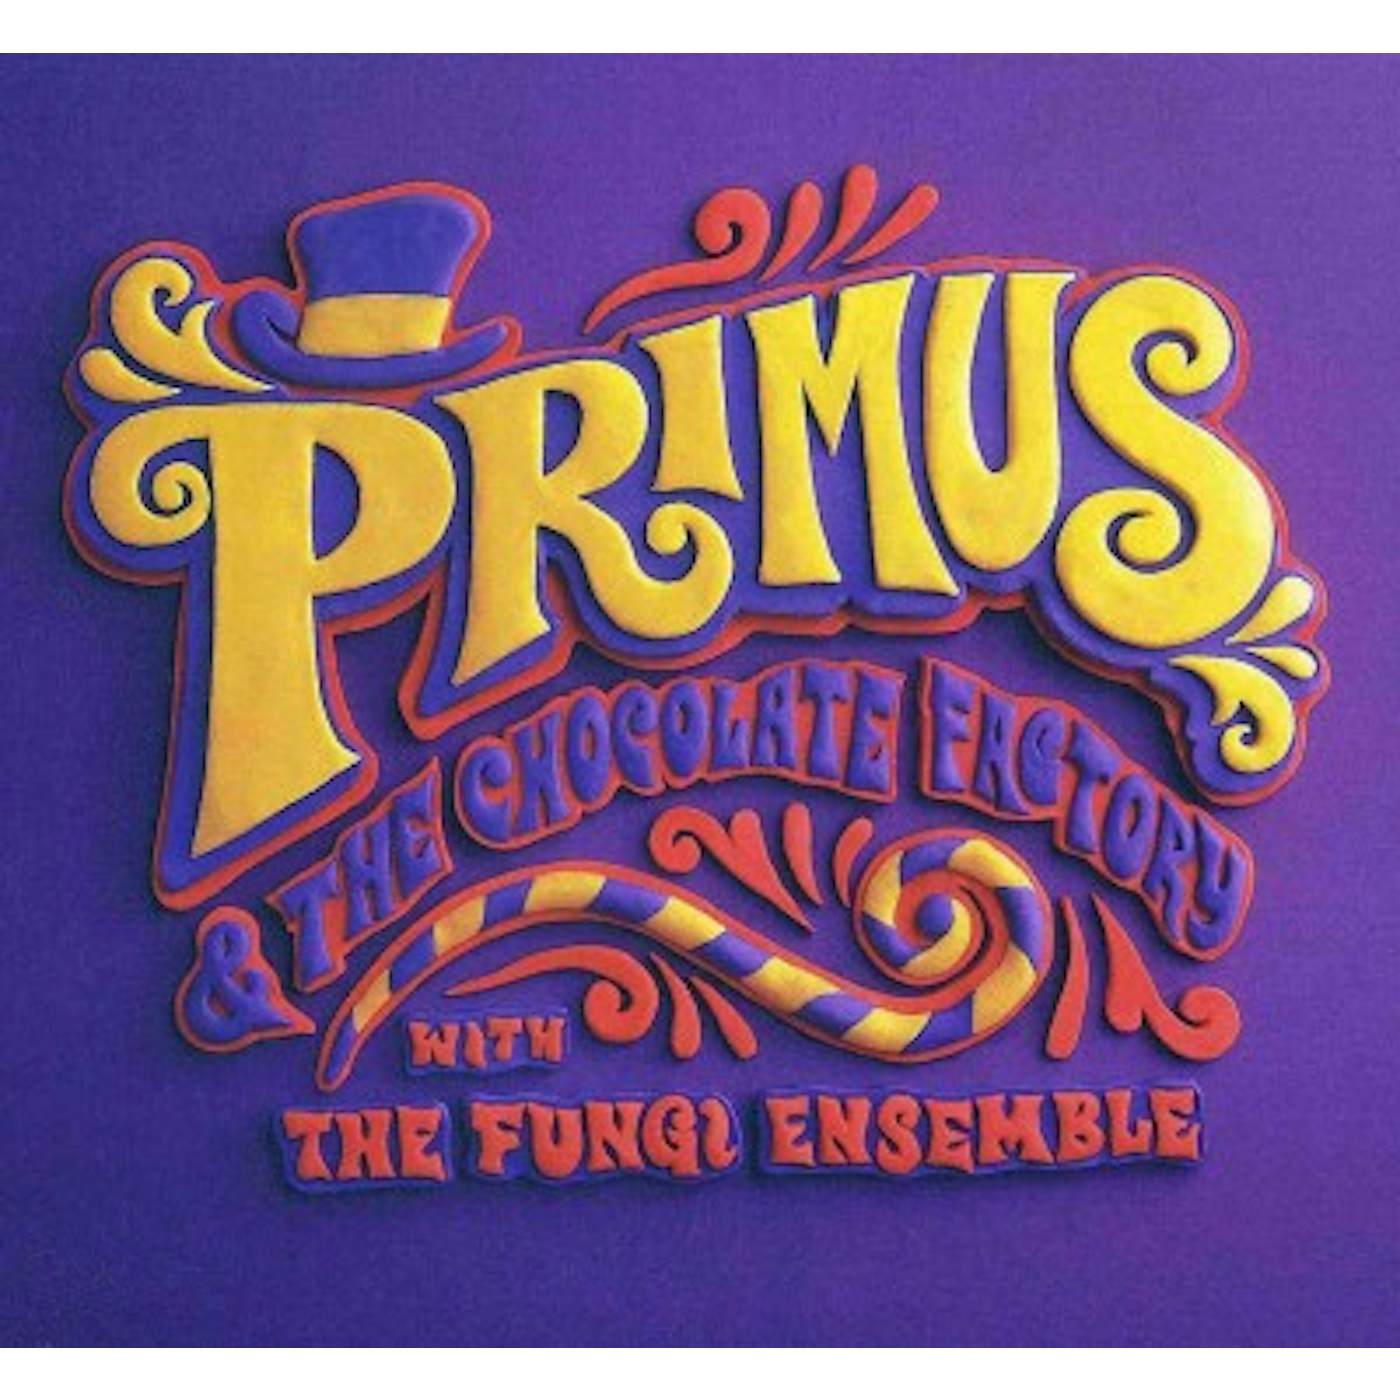 PRIMUS & THE CHOCOLATE FACTORY WITH FUNGI ENSEMBLE CD